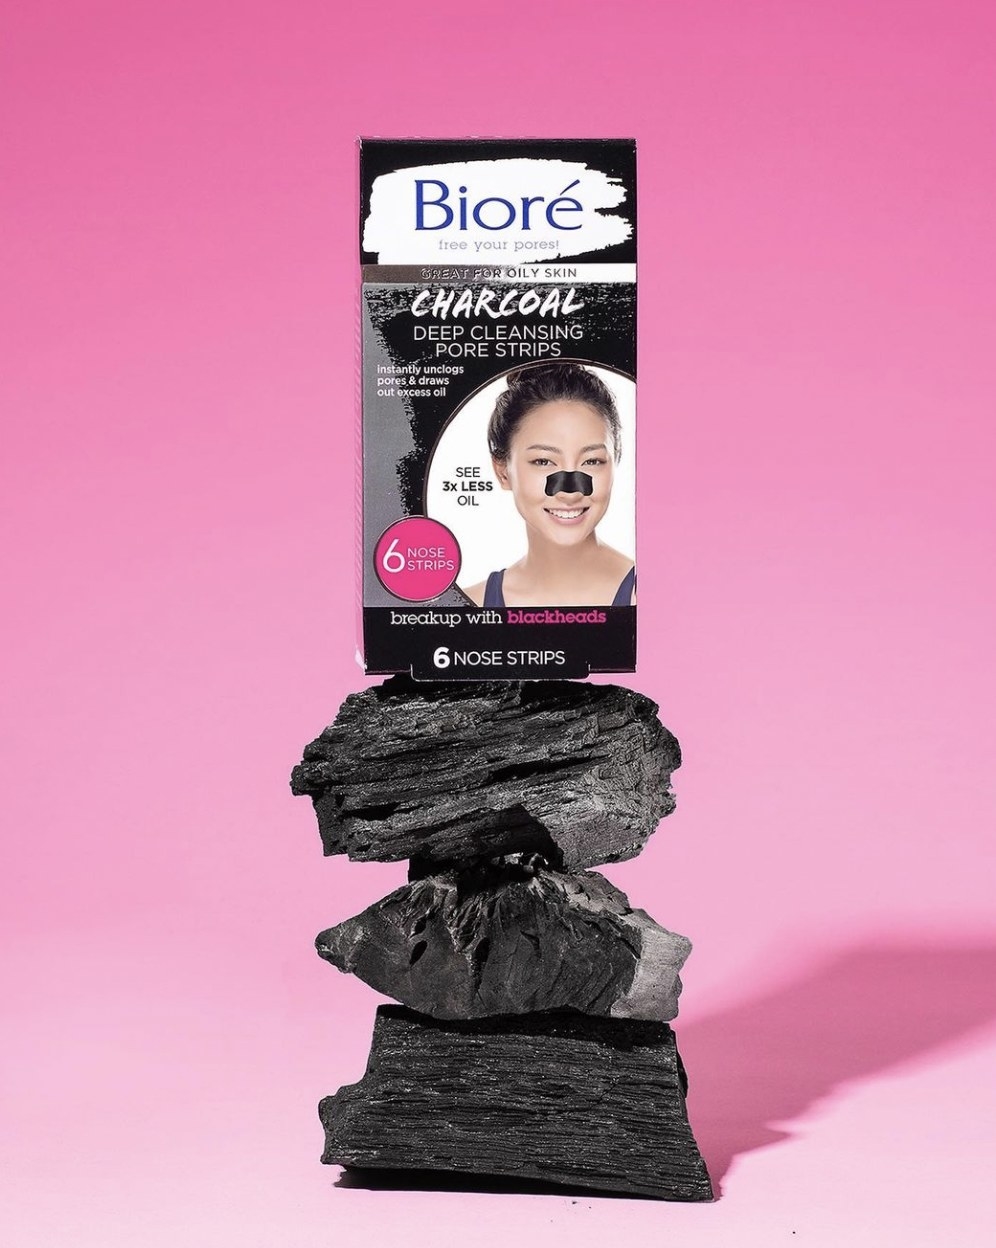 A package of pore strips on top of a stack of charcoal srips